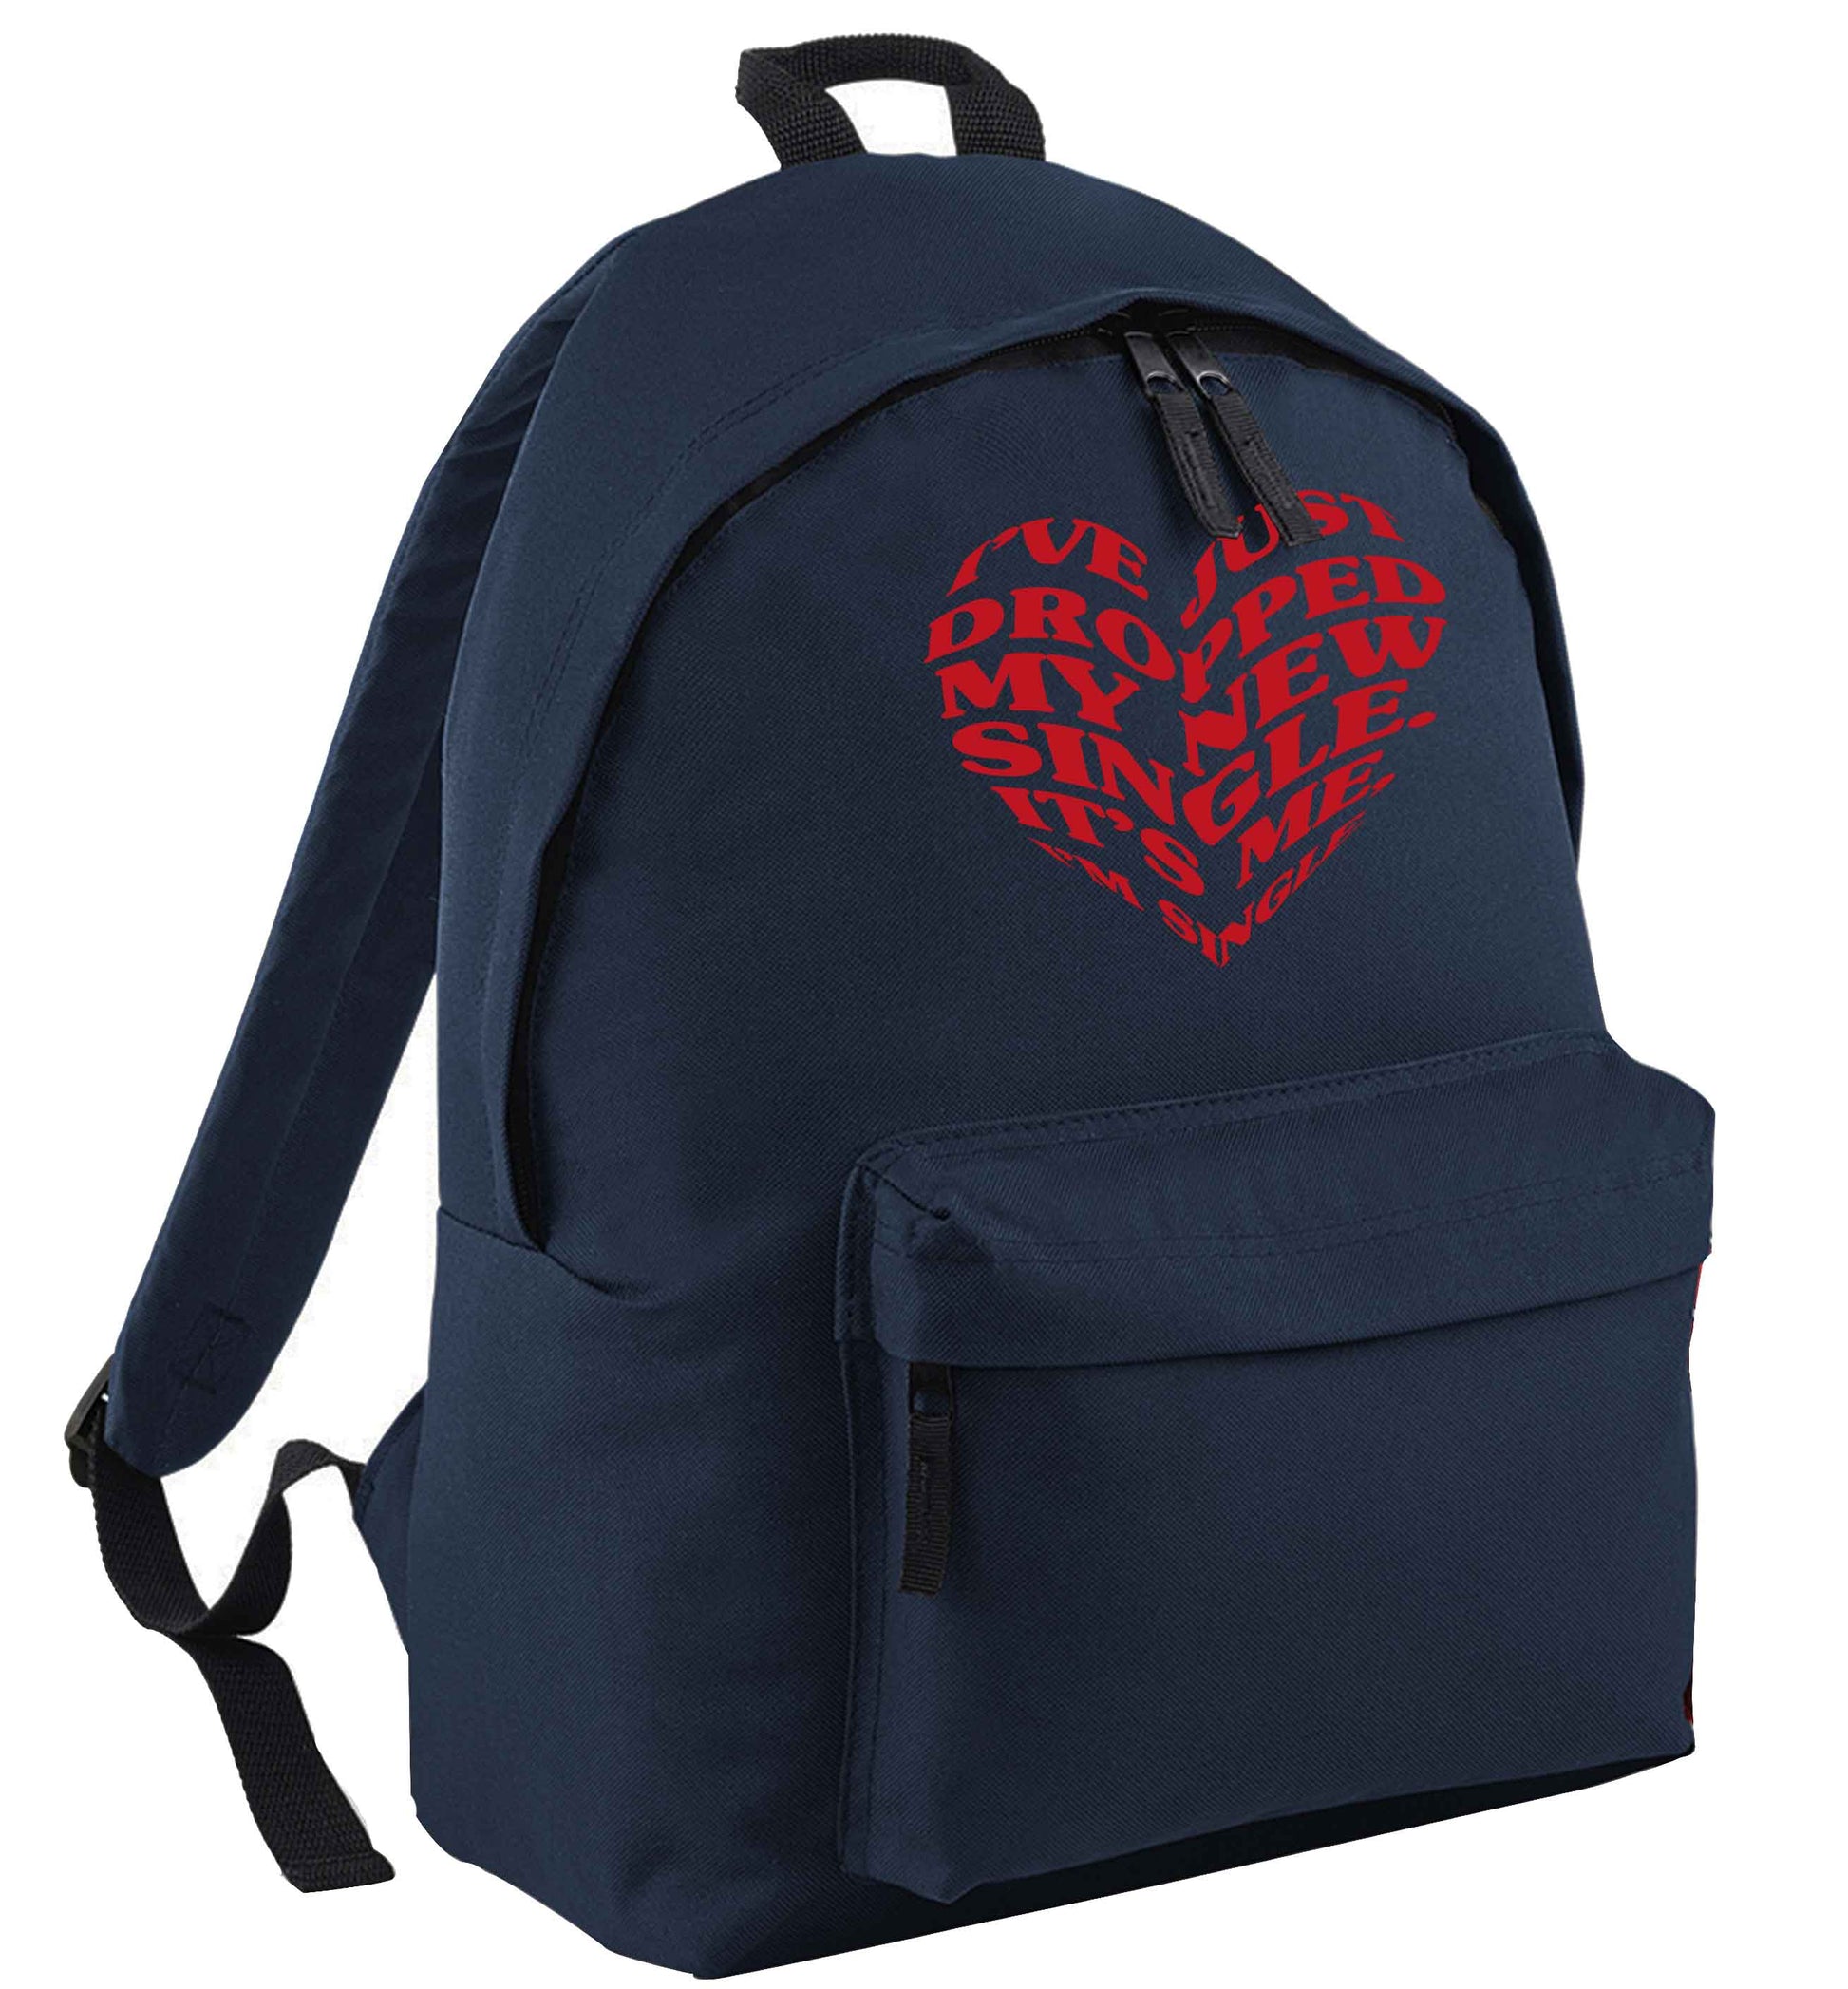 I've just dropped my new single it's me I'm single navy adults backpack